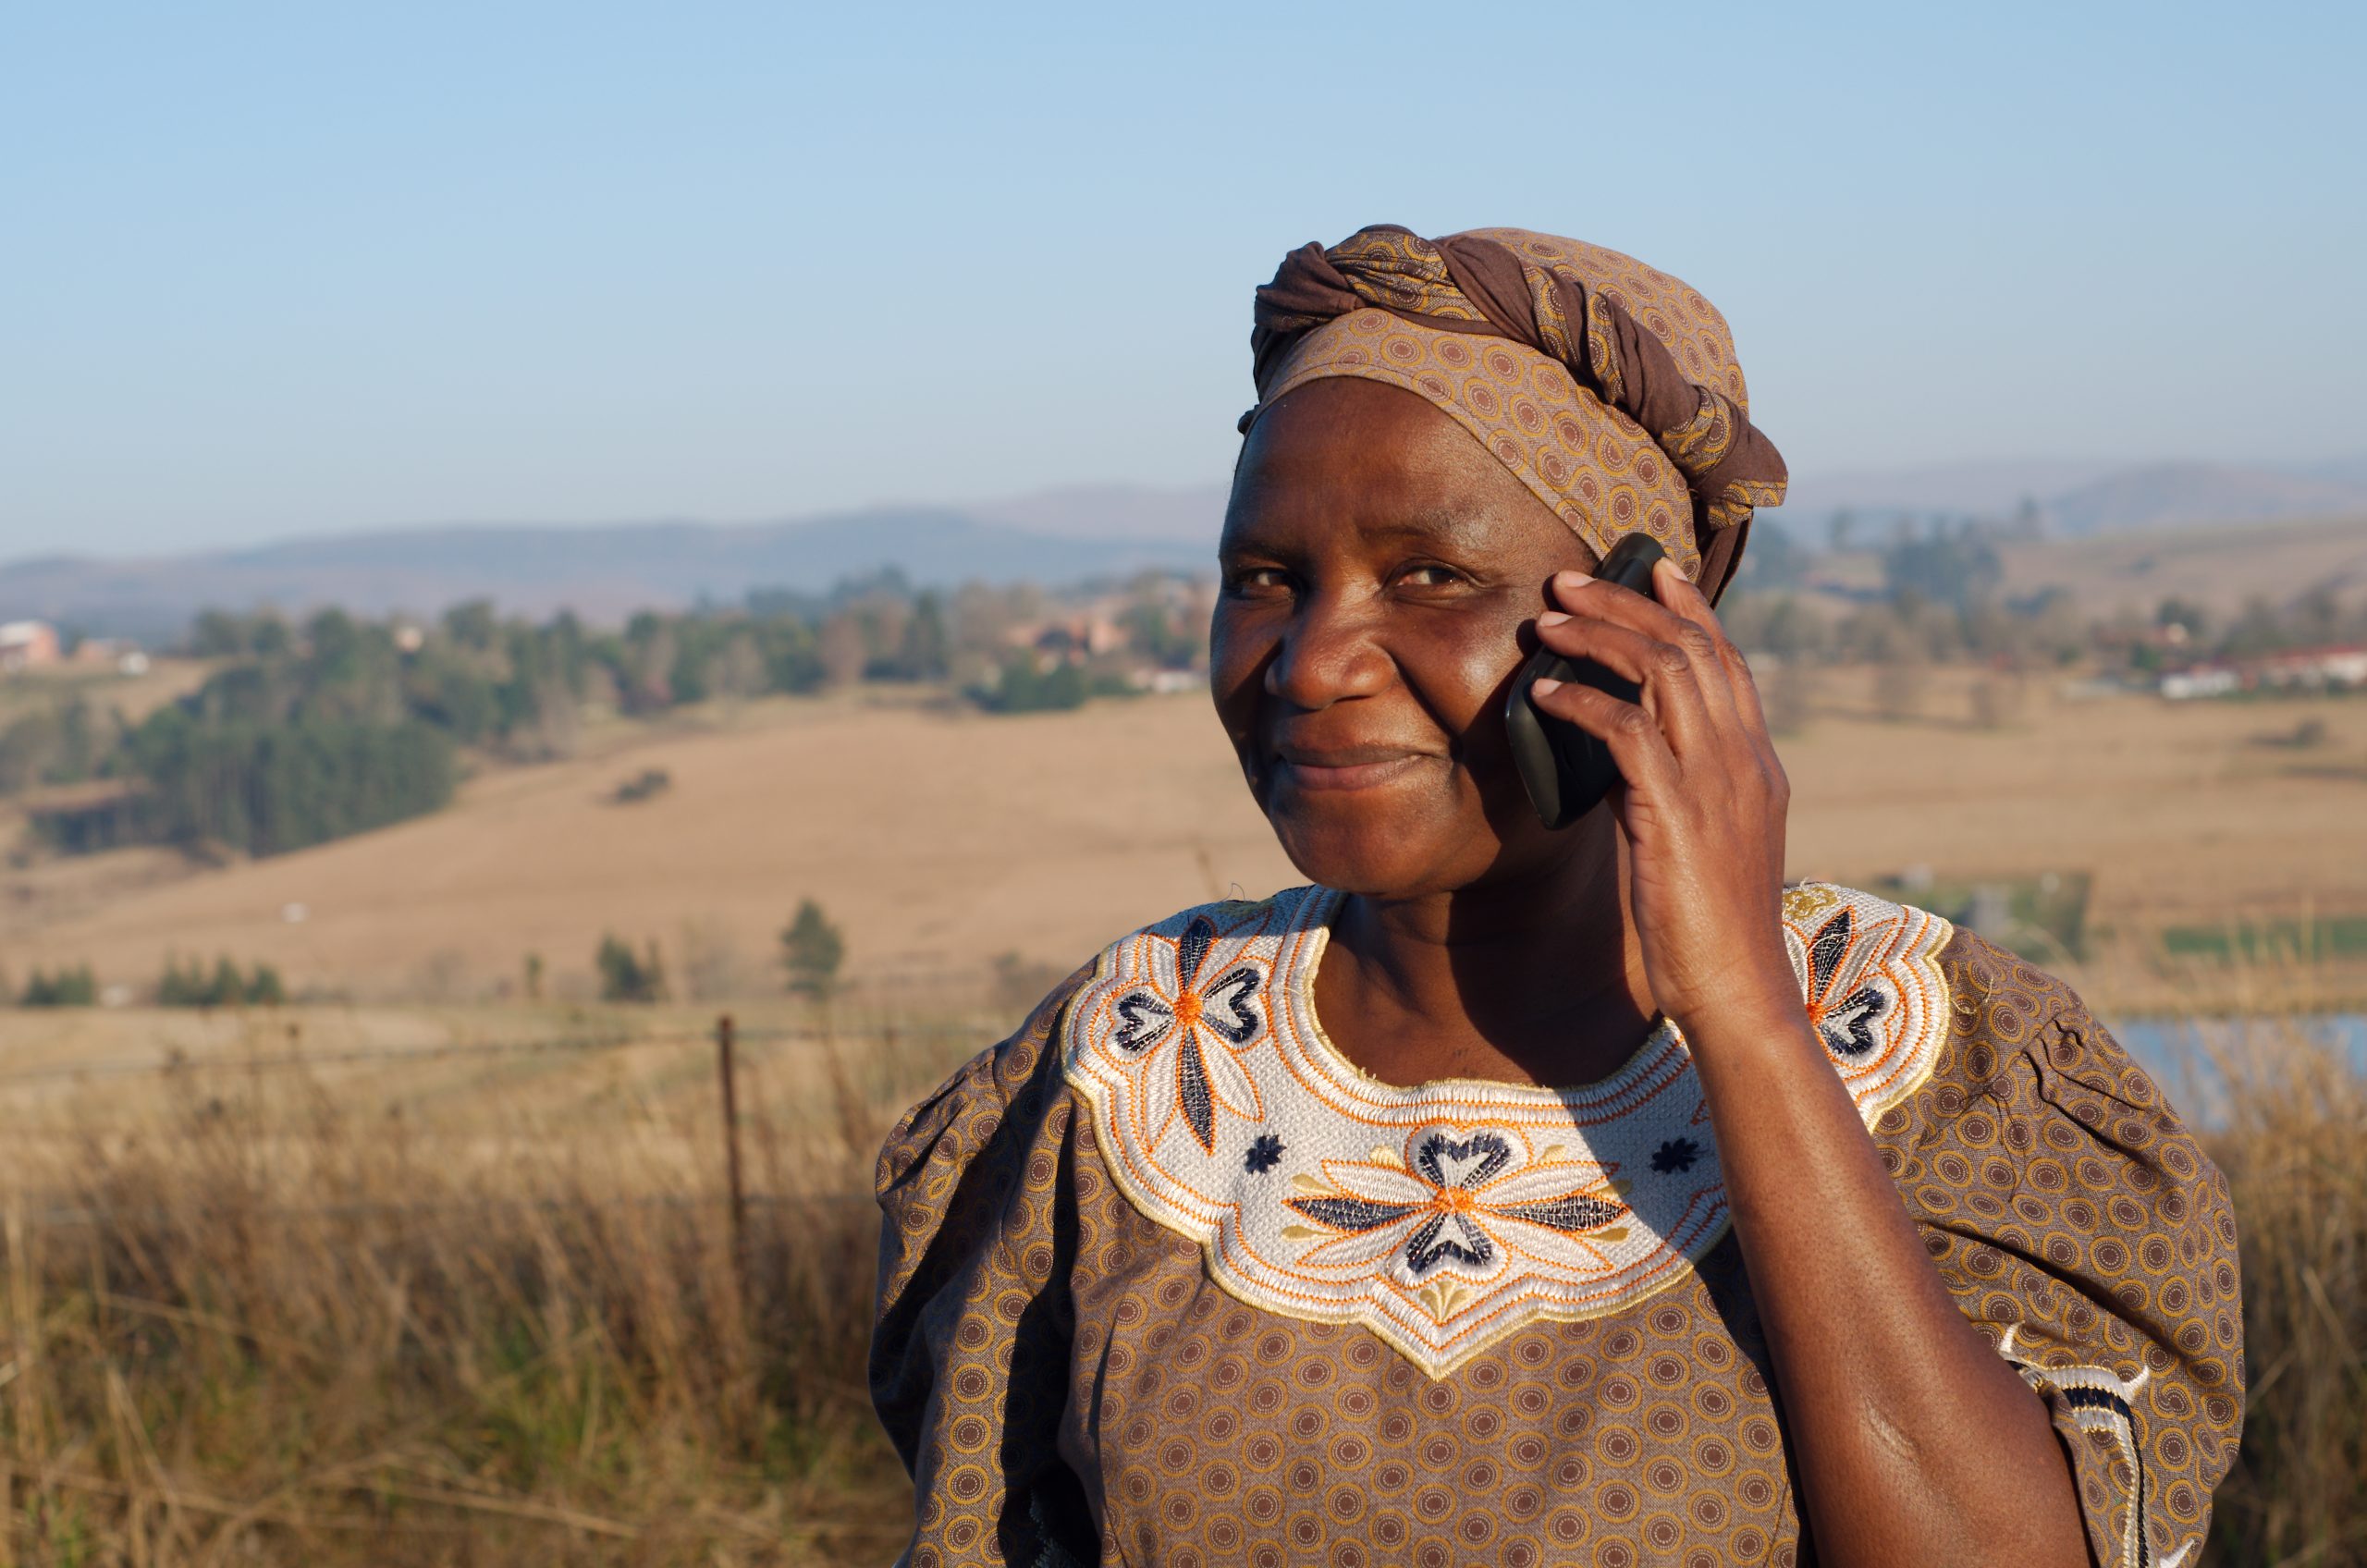 Woman on mobile phone © Photo Africa / Shutterstock